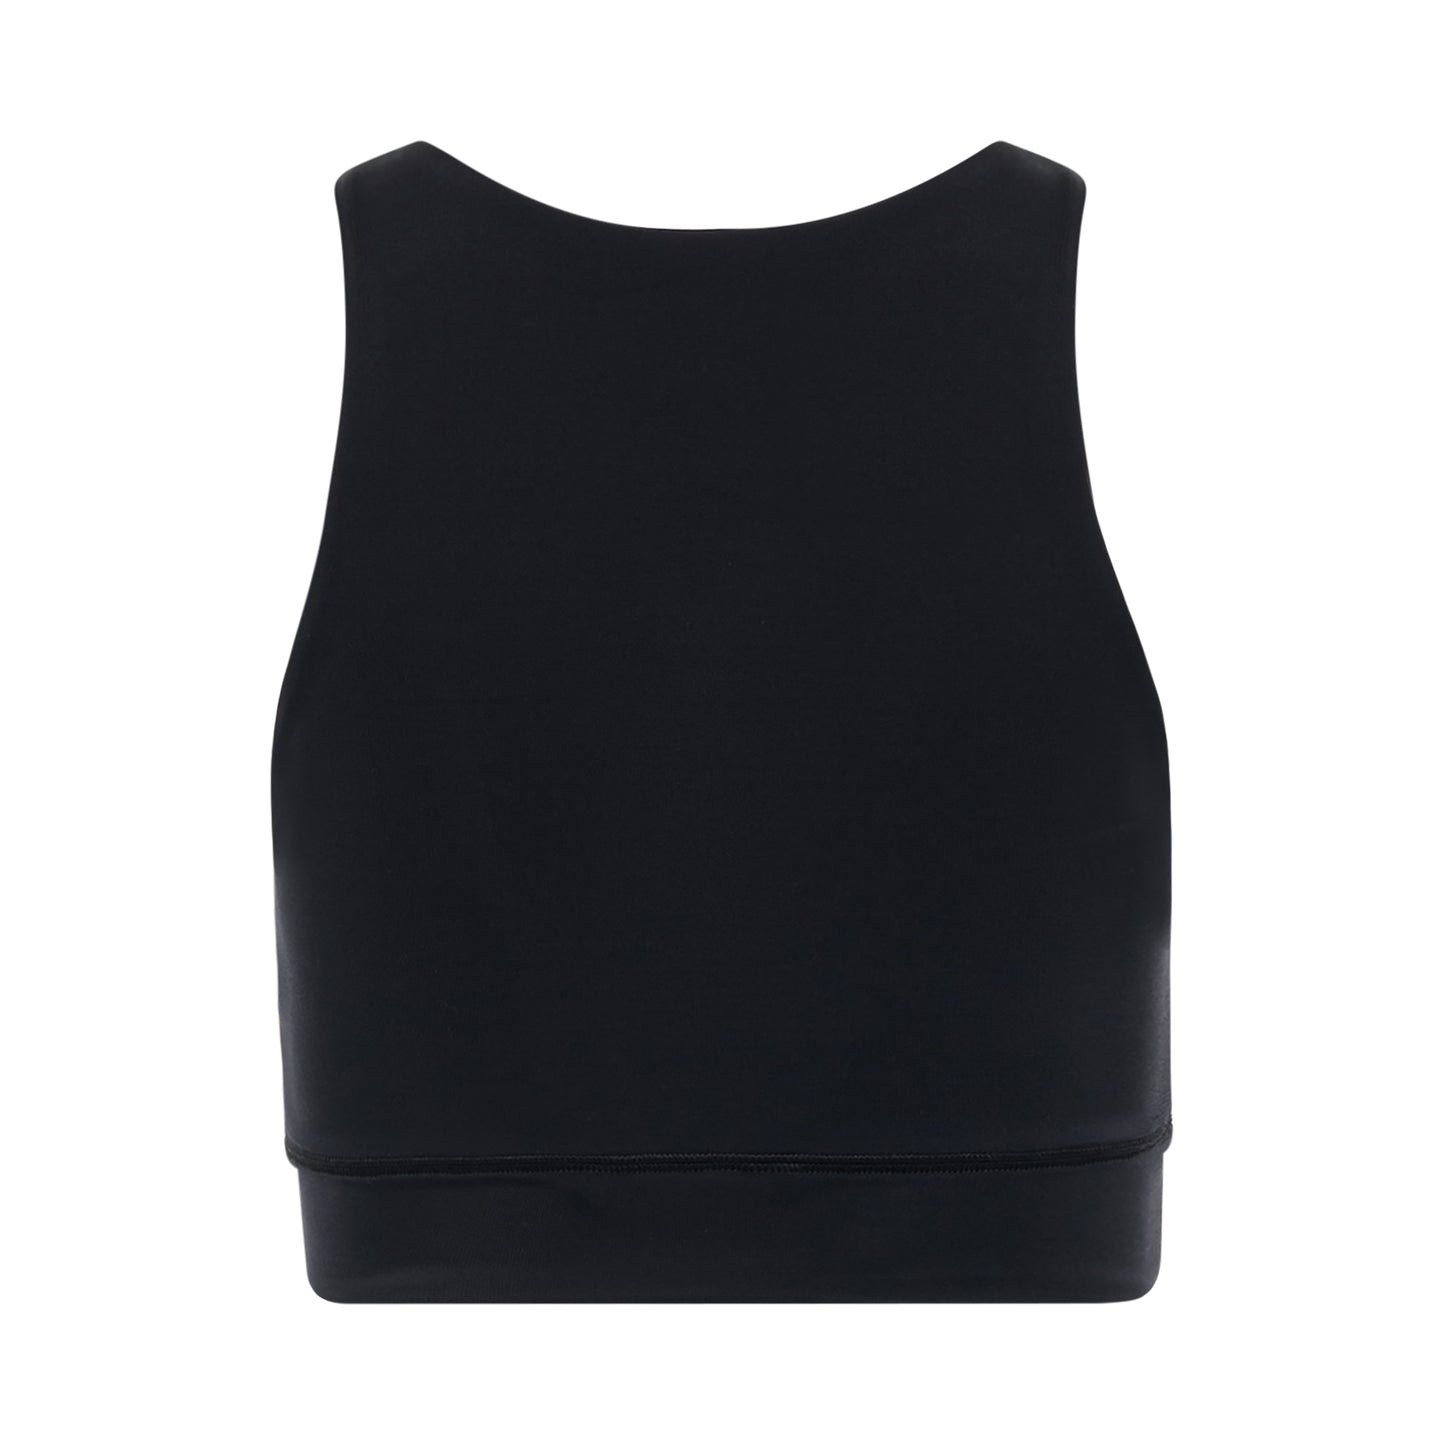 New Classic Crop Top in Black/White